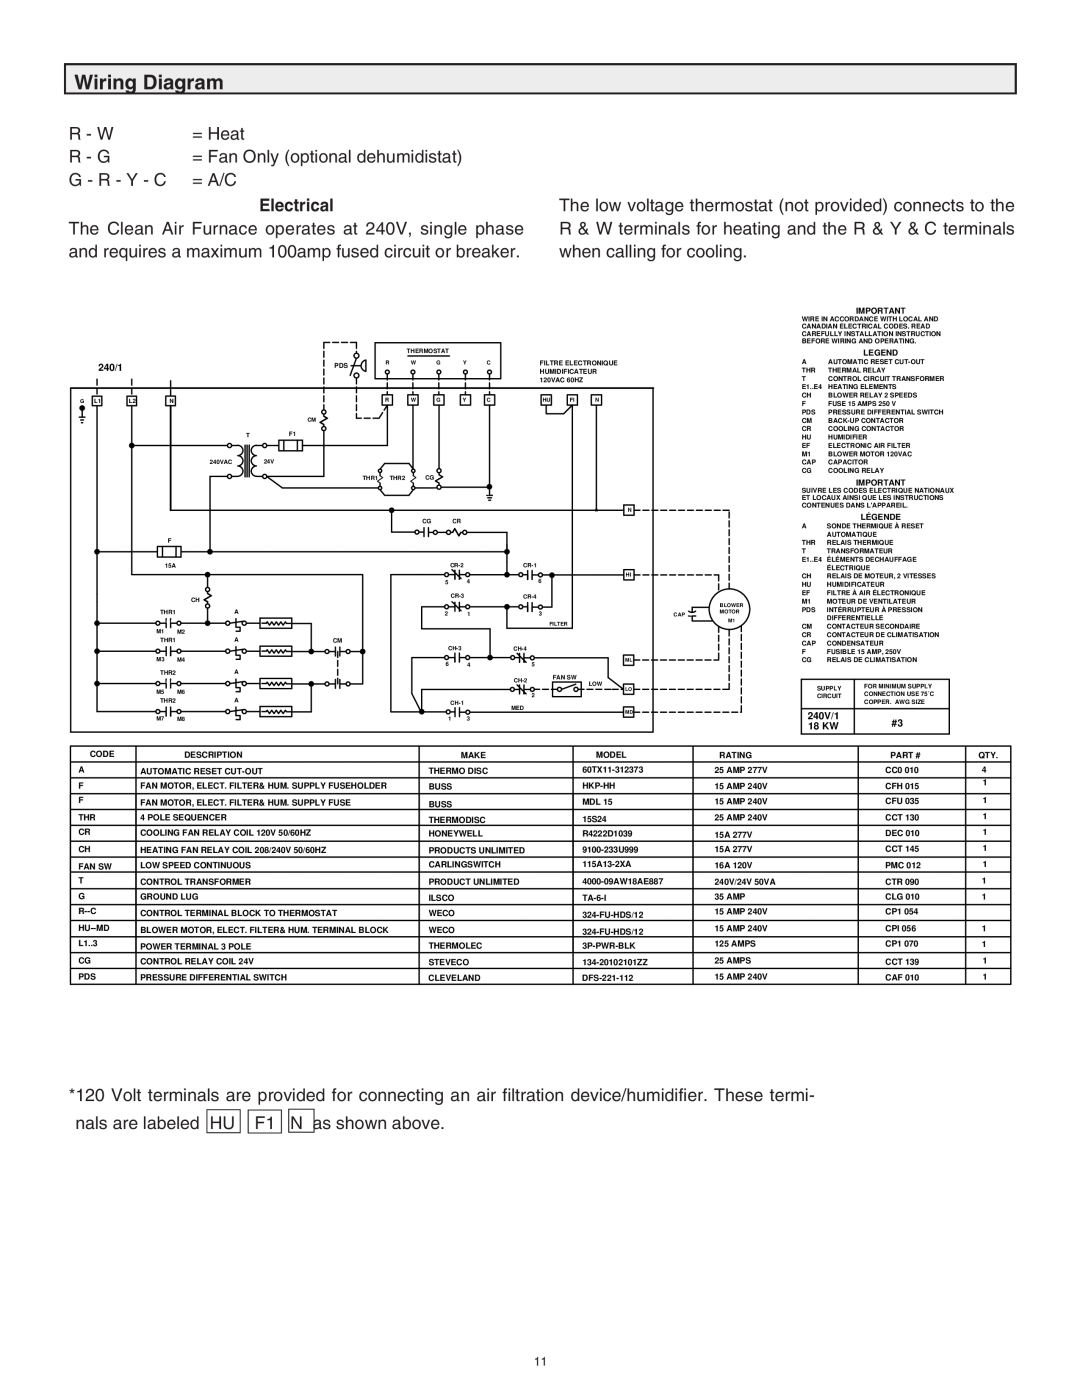 Lifebreath 60ELE operating instructions Wiring Diagram, Electrical 